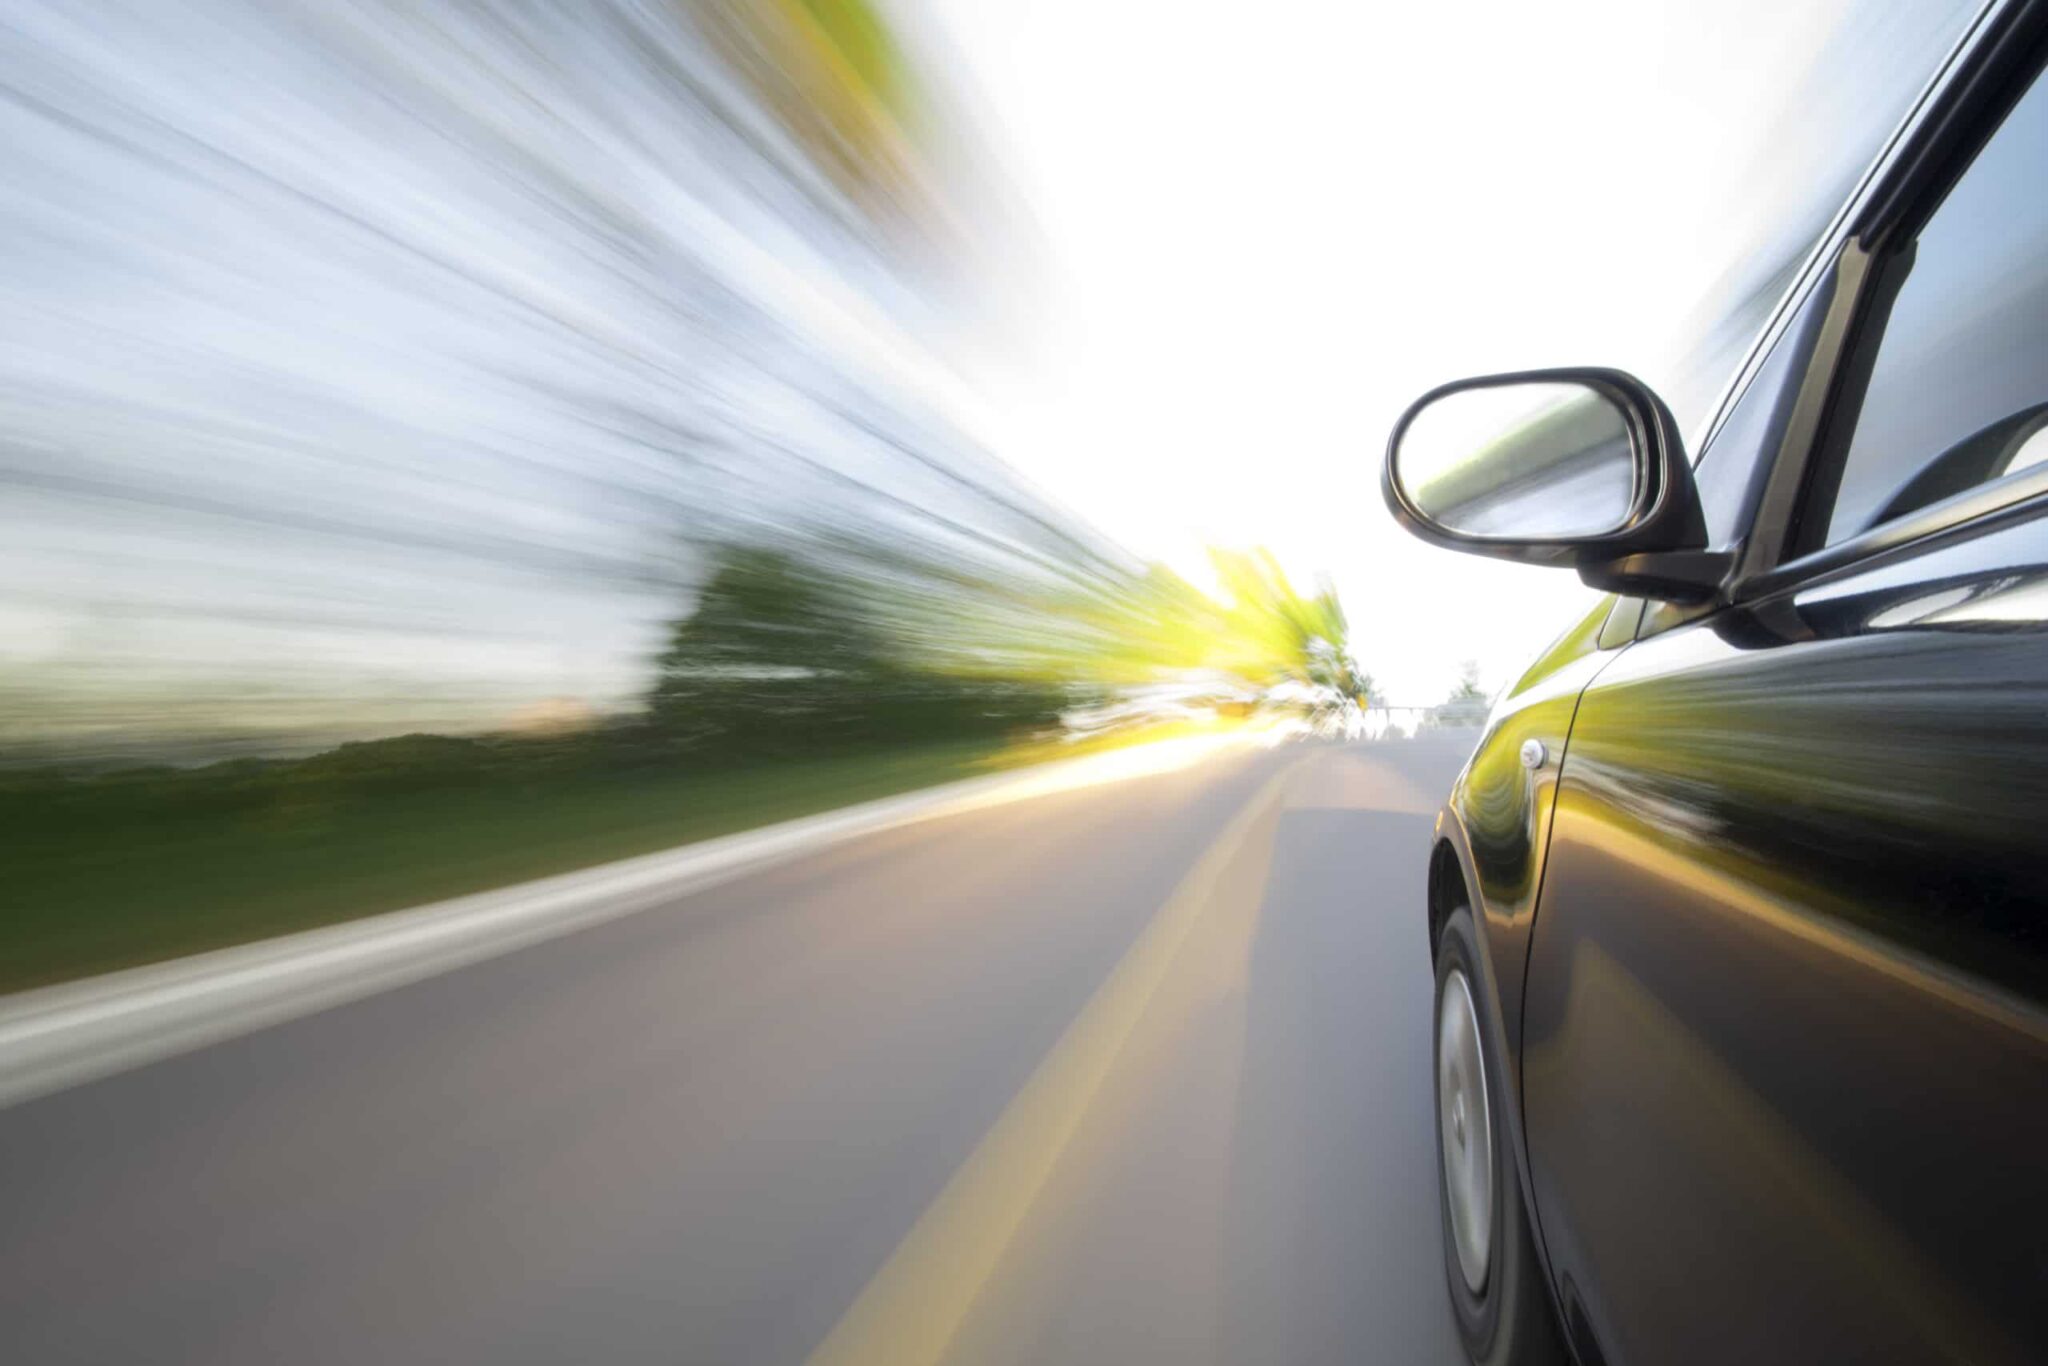 Speeding Contributes to More Than 26% of Traffic Fatalities